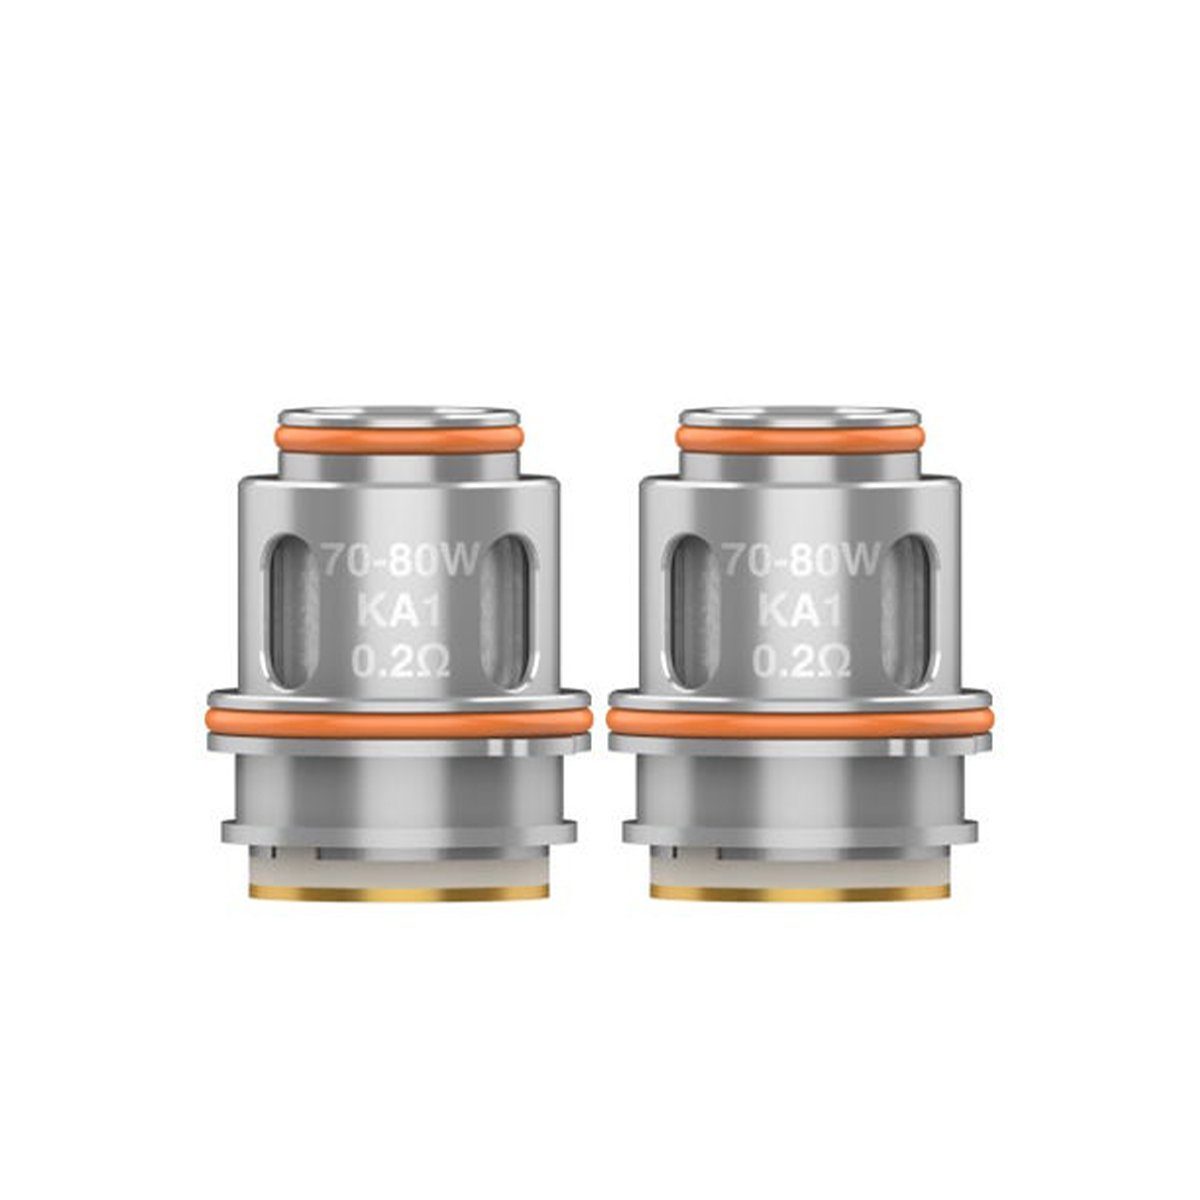 GeekVape - Z Replacement Coils (5 Pack) Replacement Coil GeekVape 0.2 ohm 